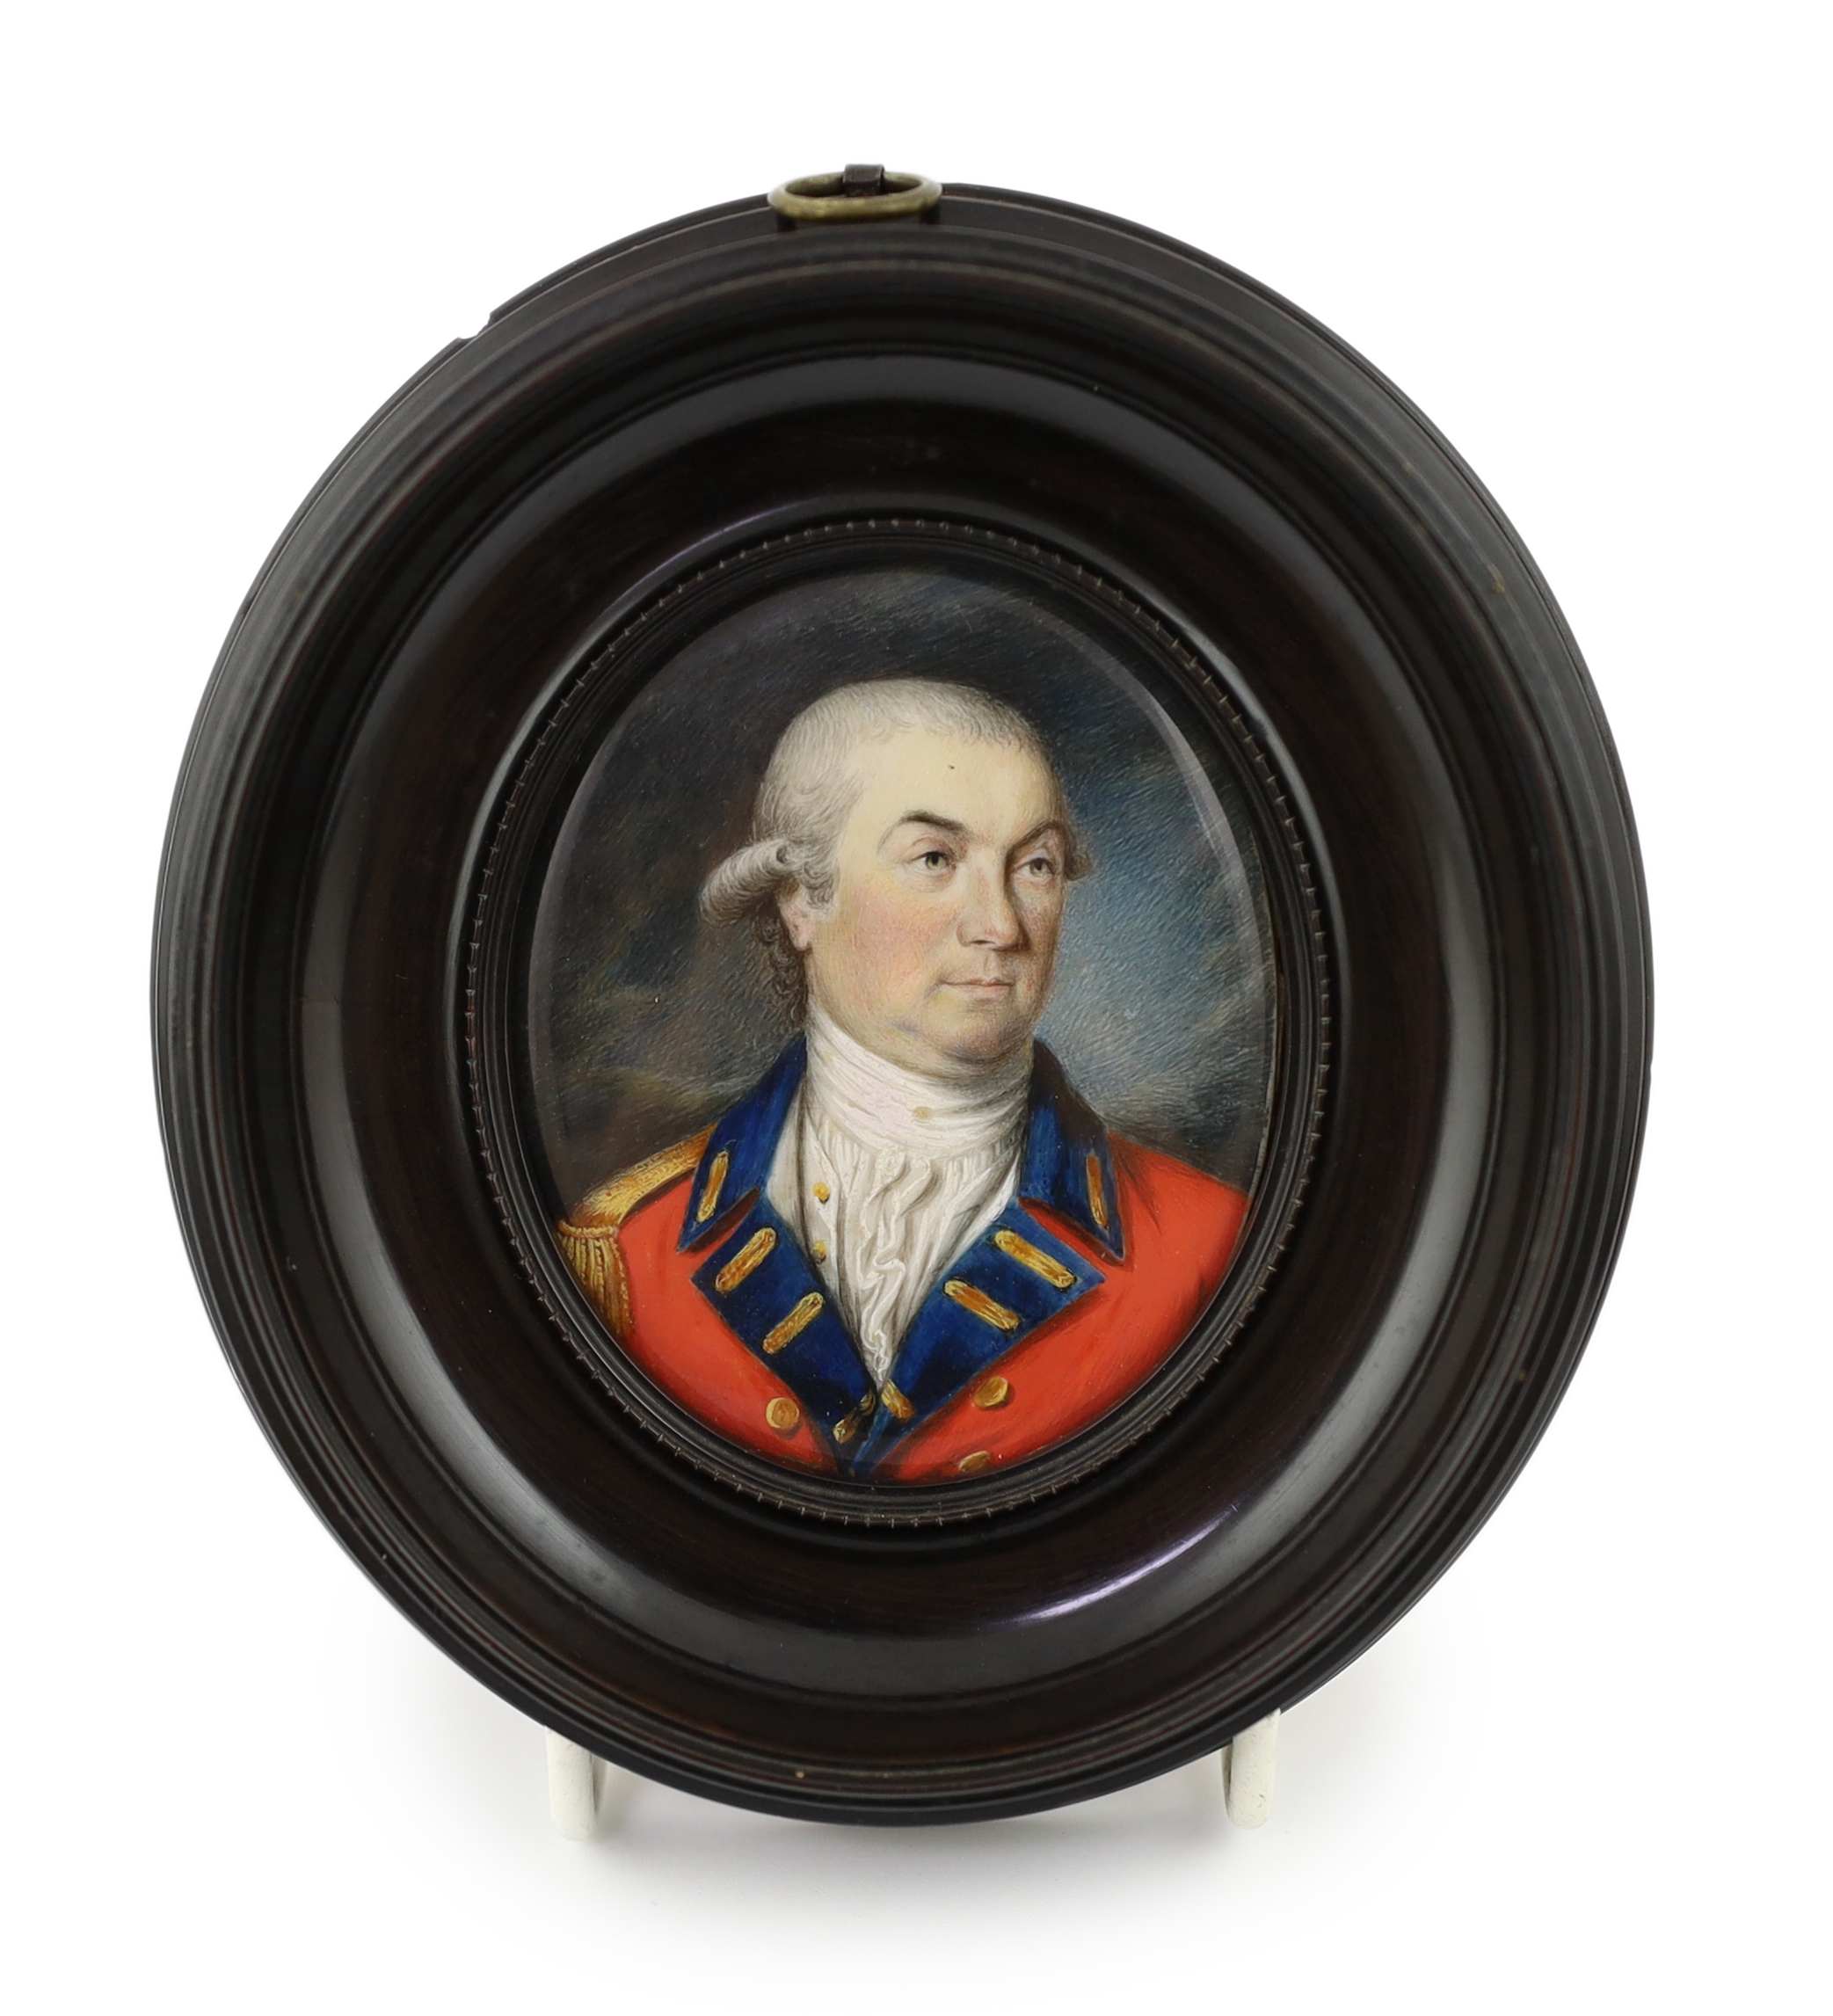 English School circa 1800, Portrait miniature of an army officer, watercolour on ivory, 7 x 6cm. CITES Submission reference 2MGGRZBR